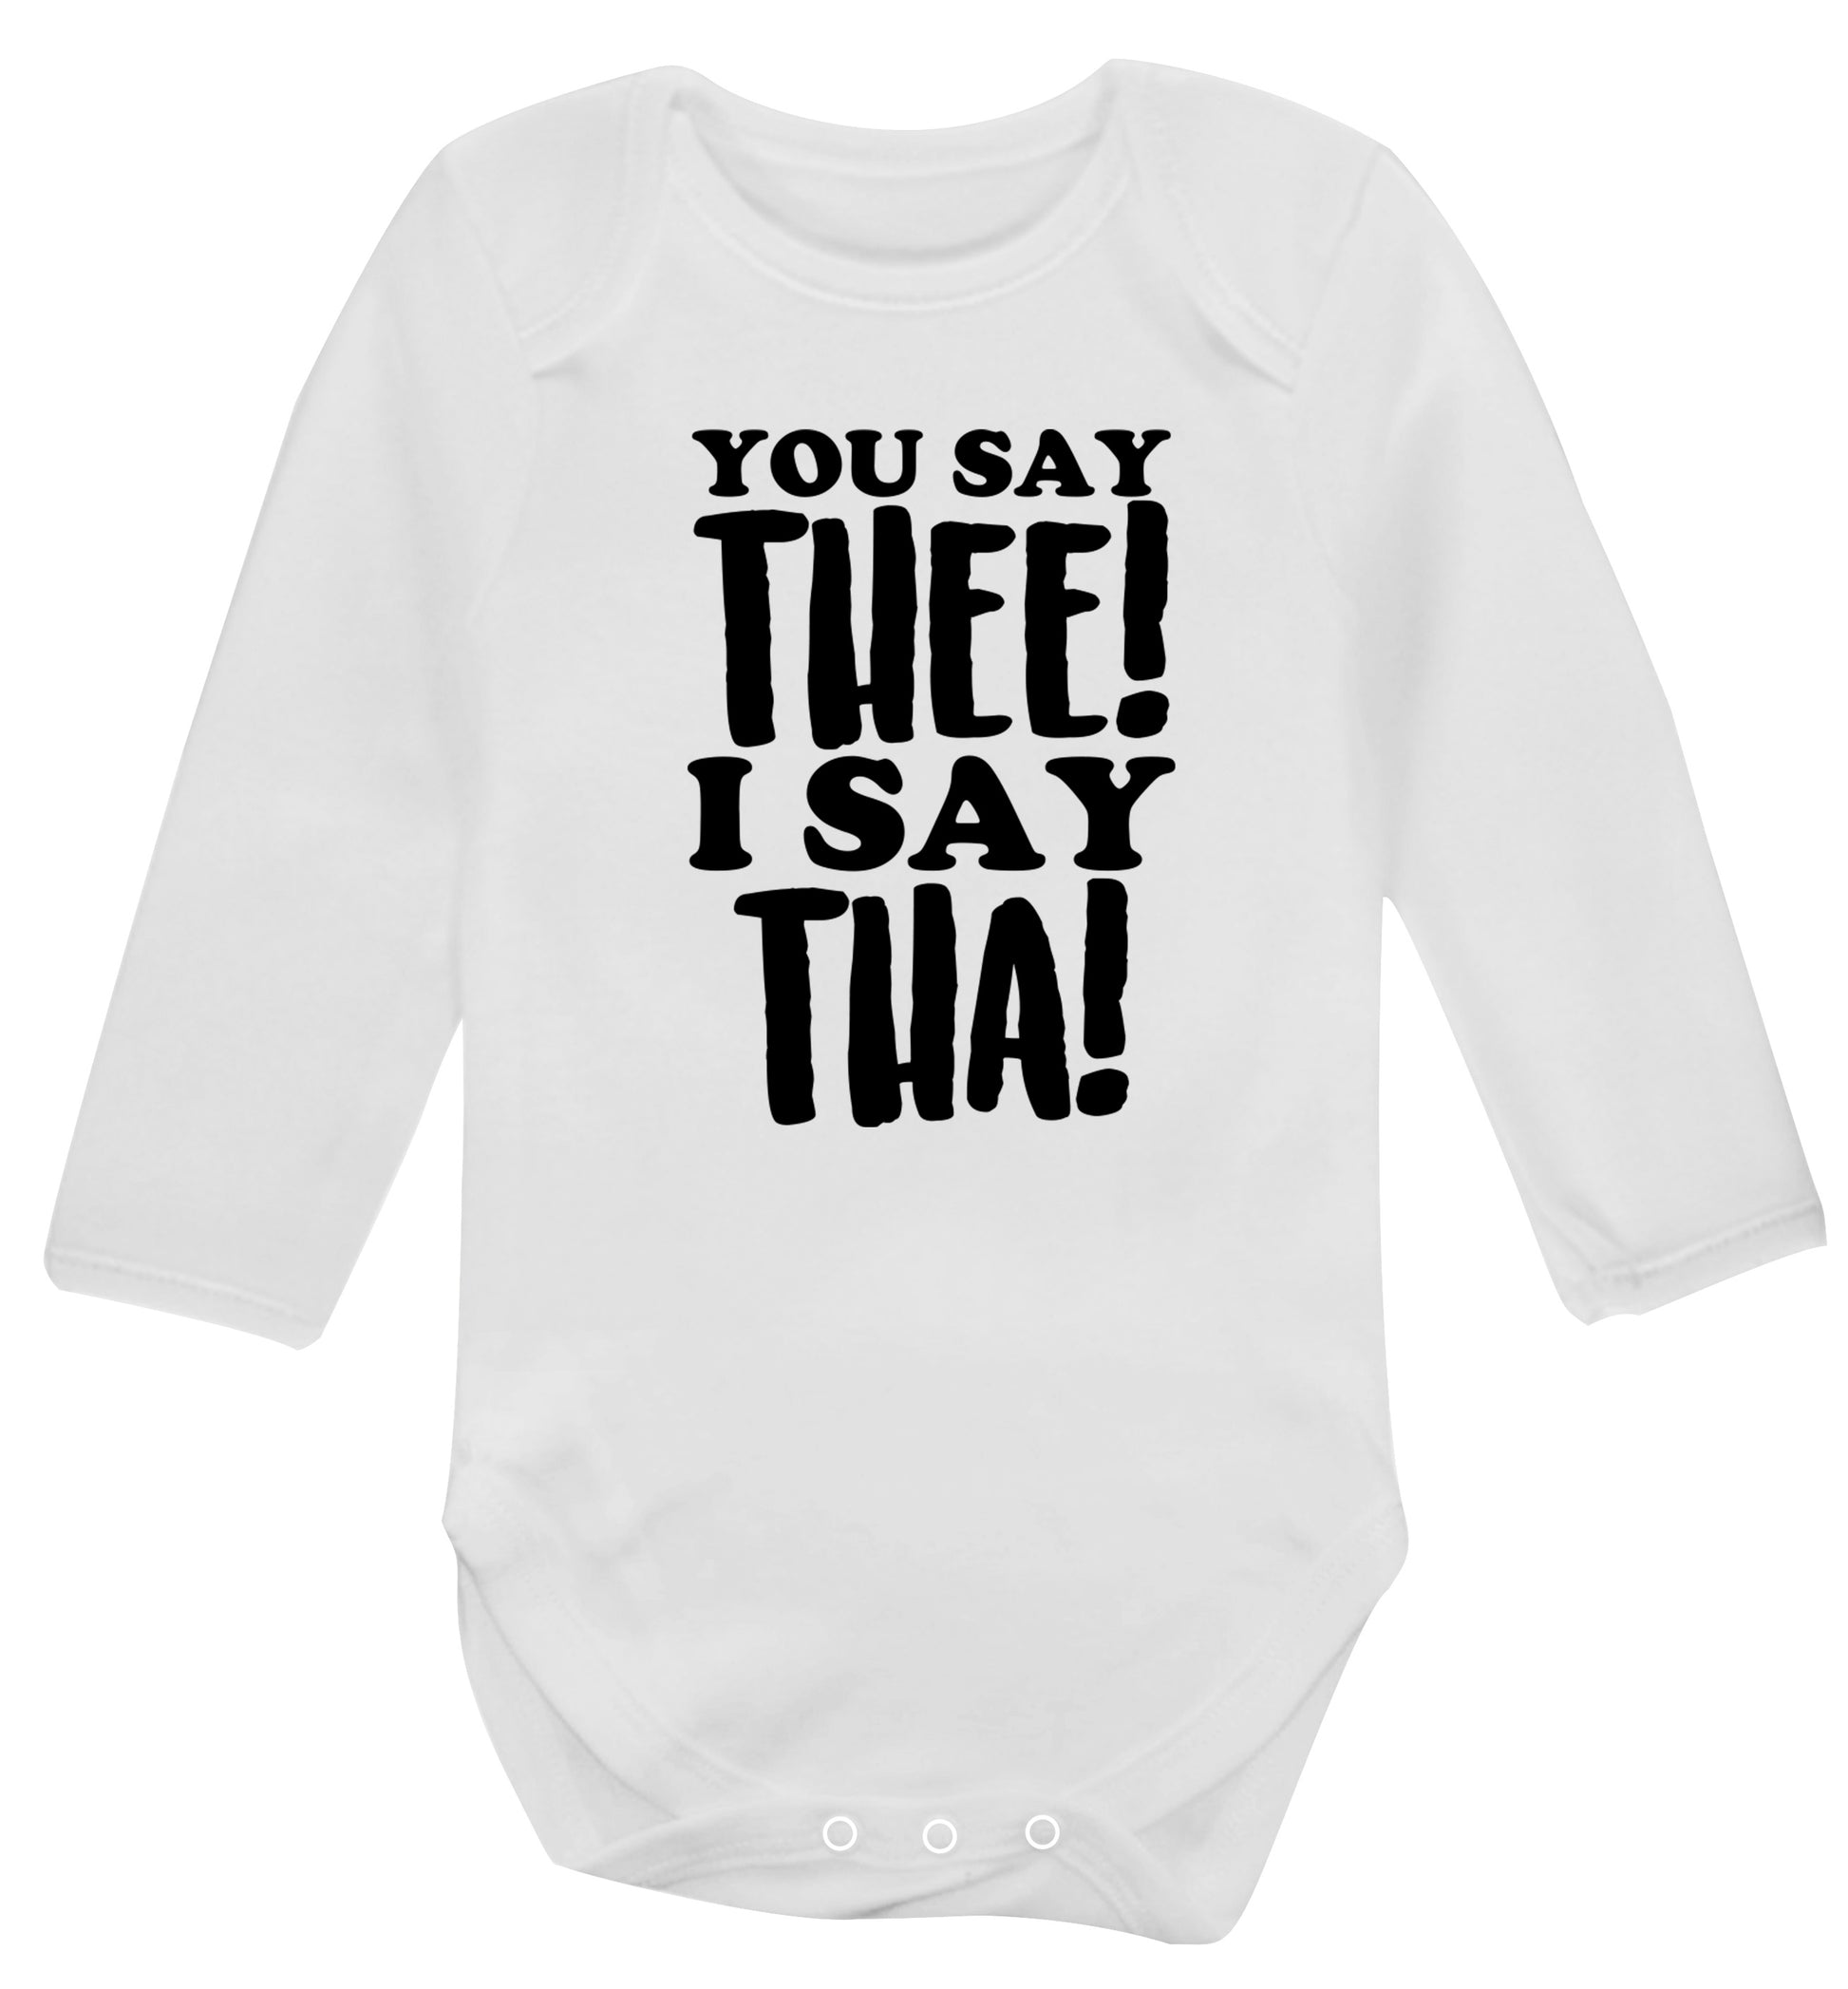 You say thee I say tha Baby Vest long sleeved white 6-12 months